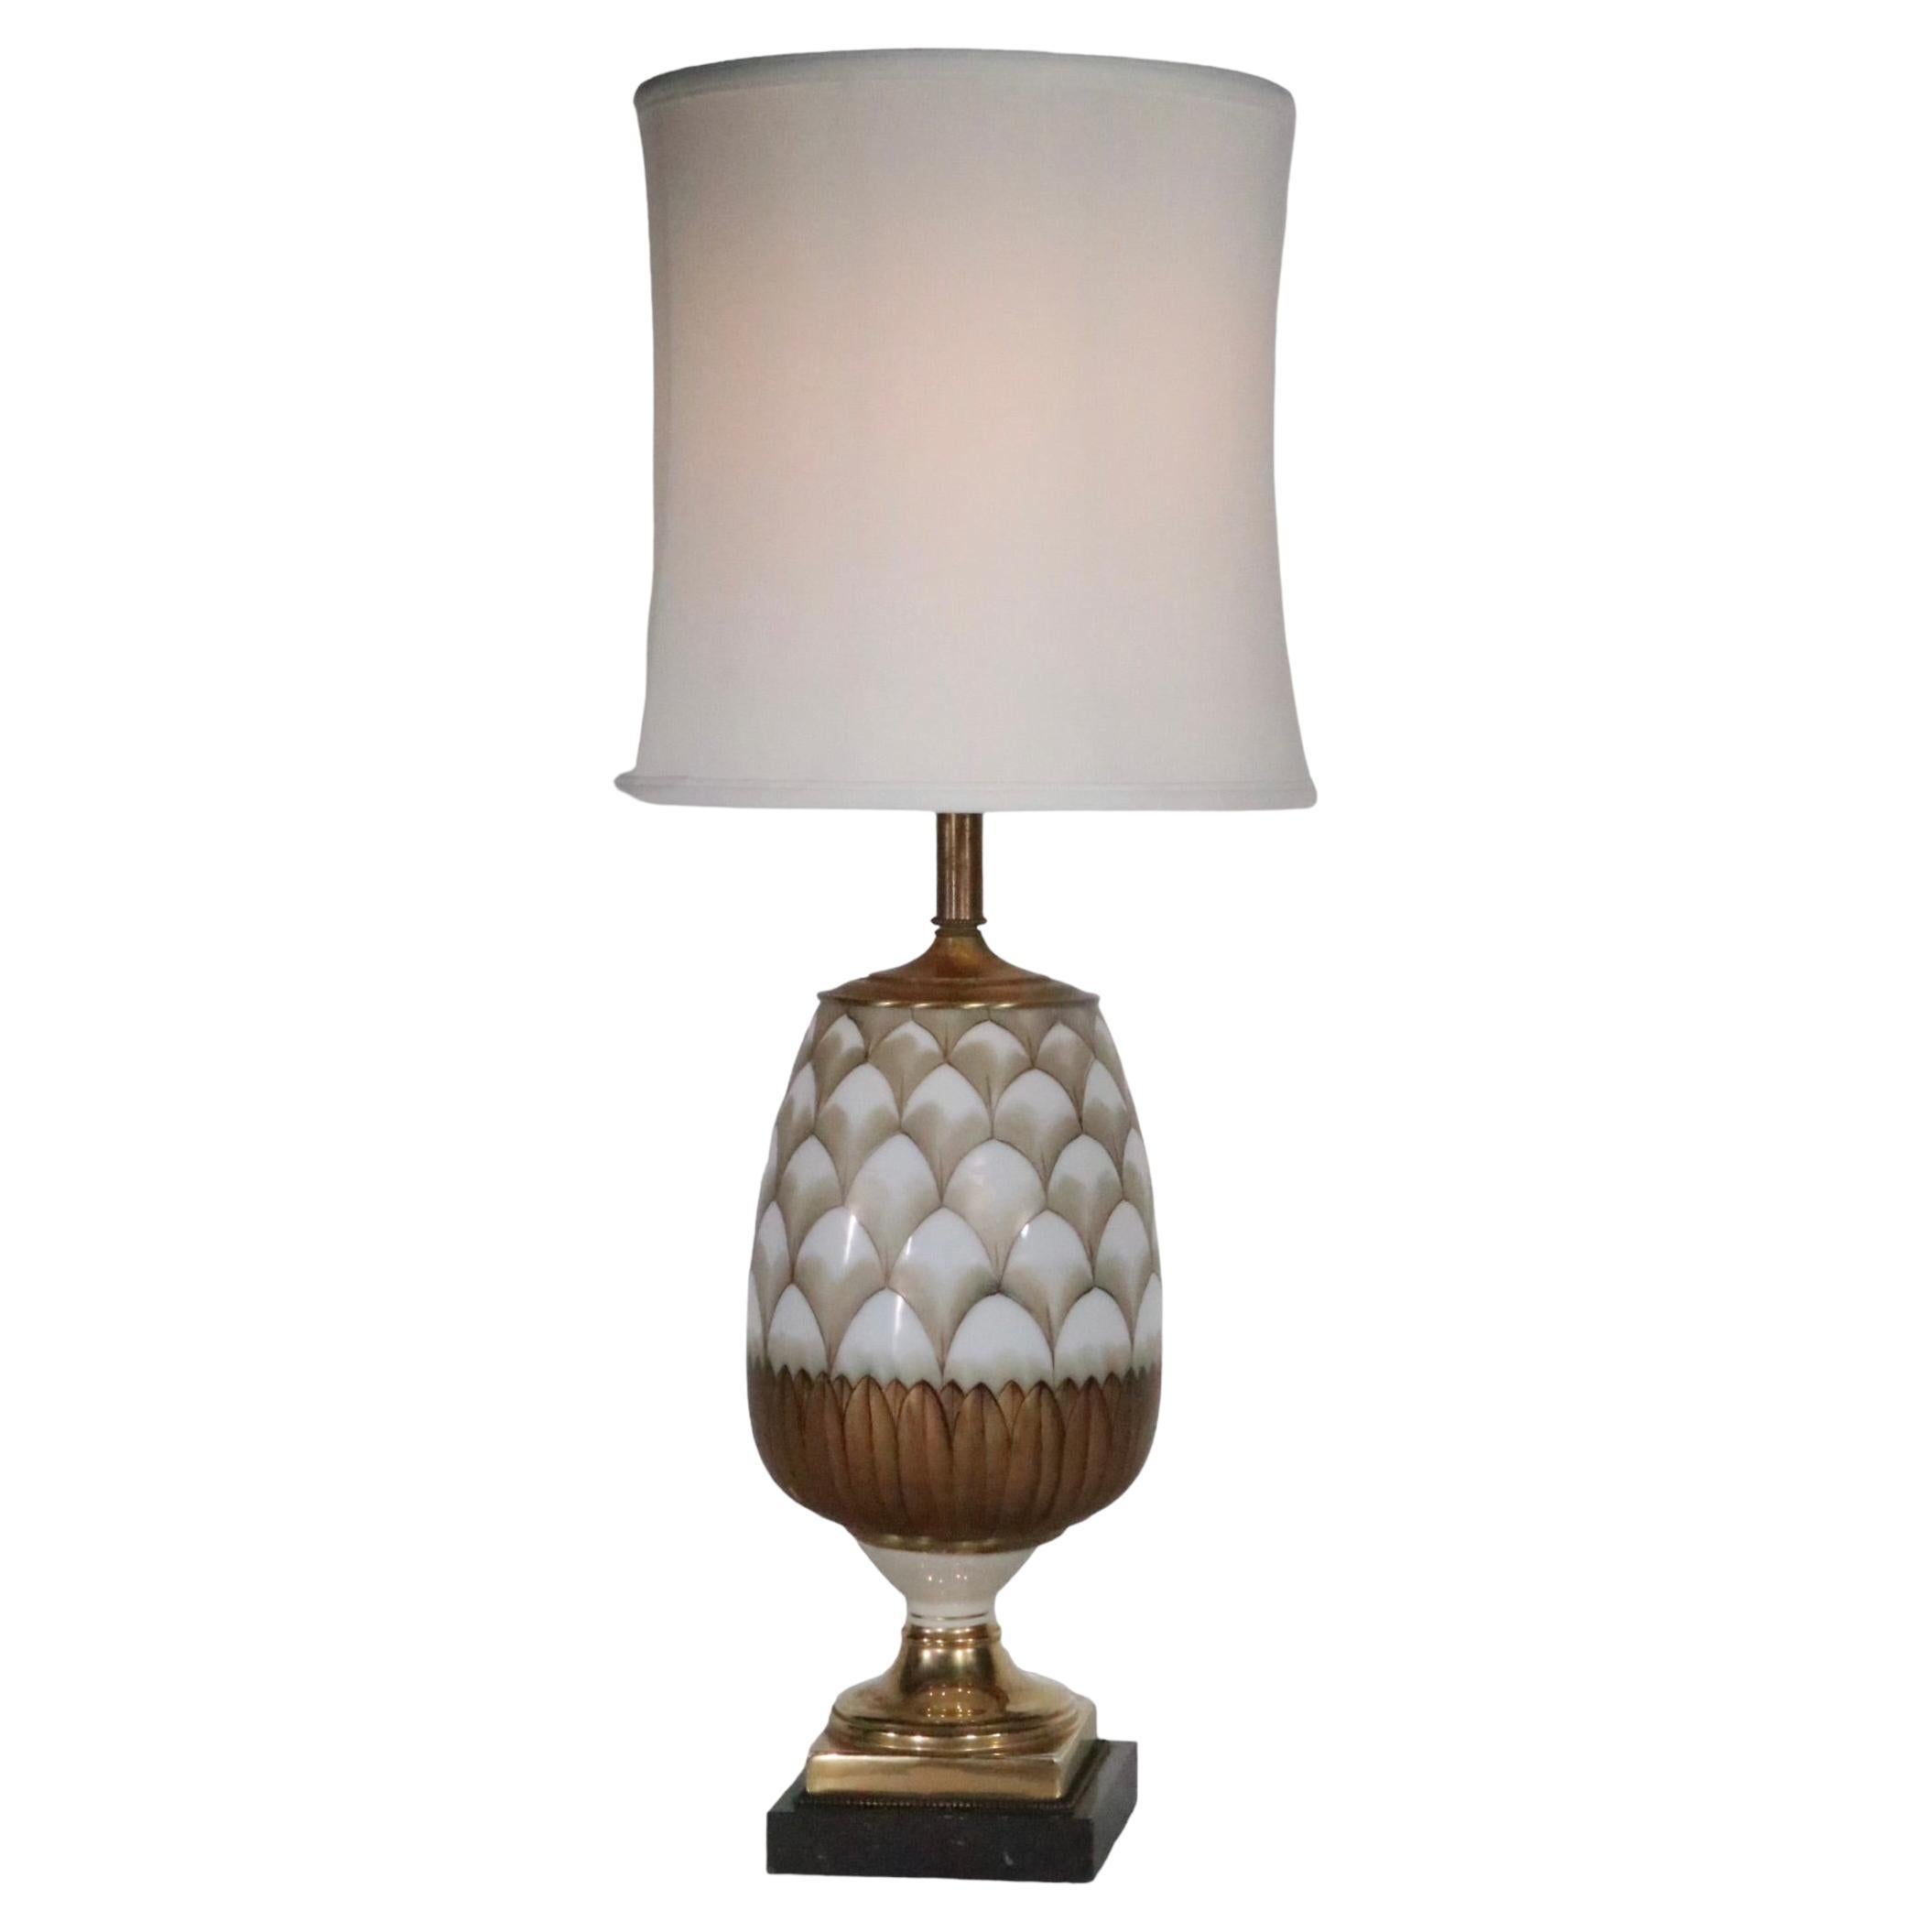 American Neo Classical Hollywood Regency Table Lamp design att. to Tommi Parzinger